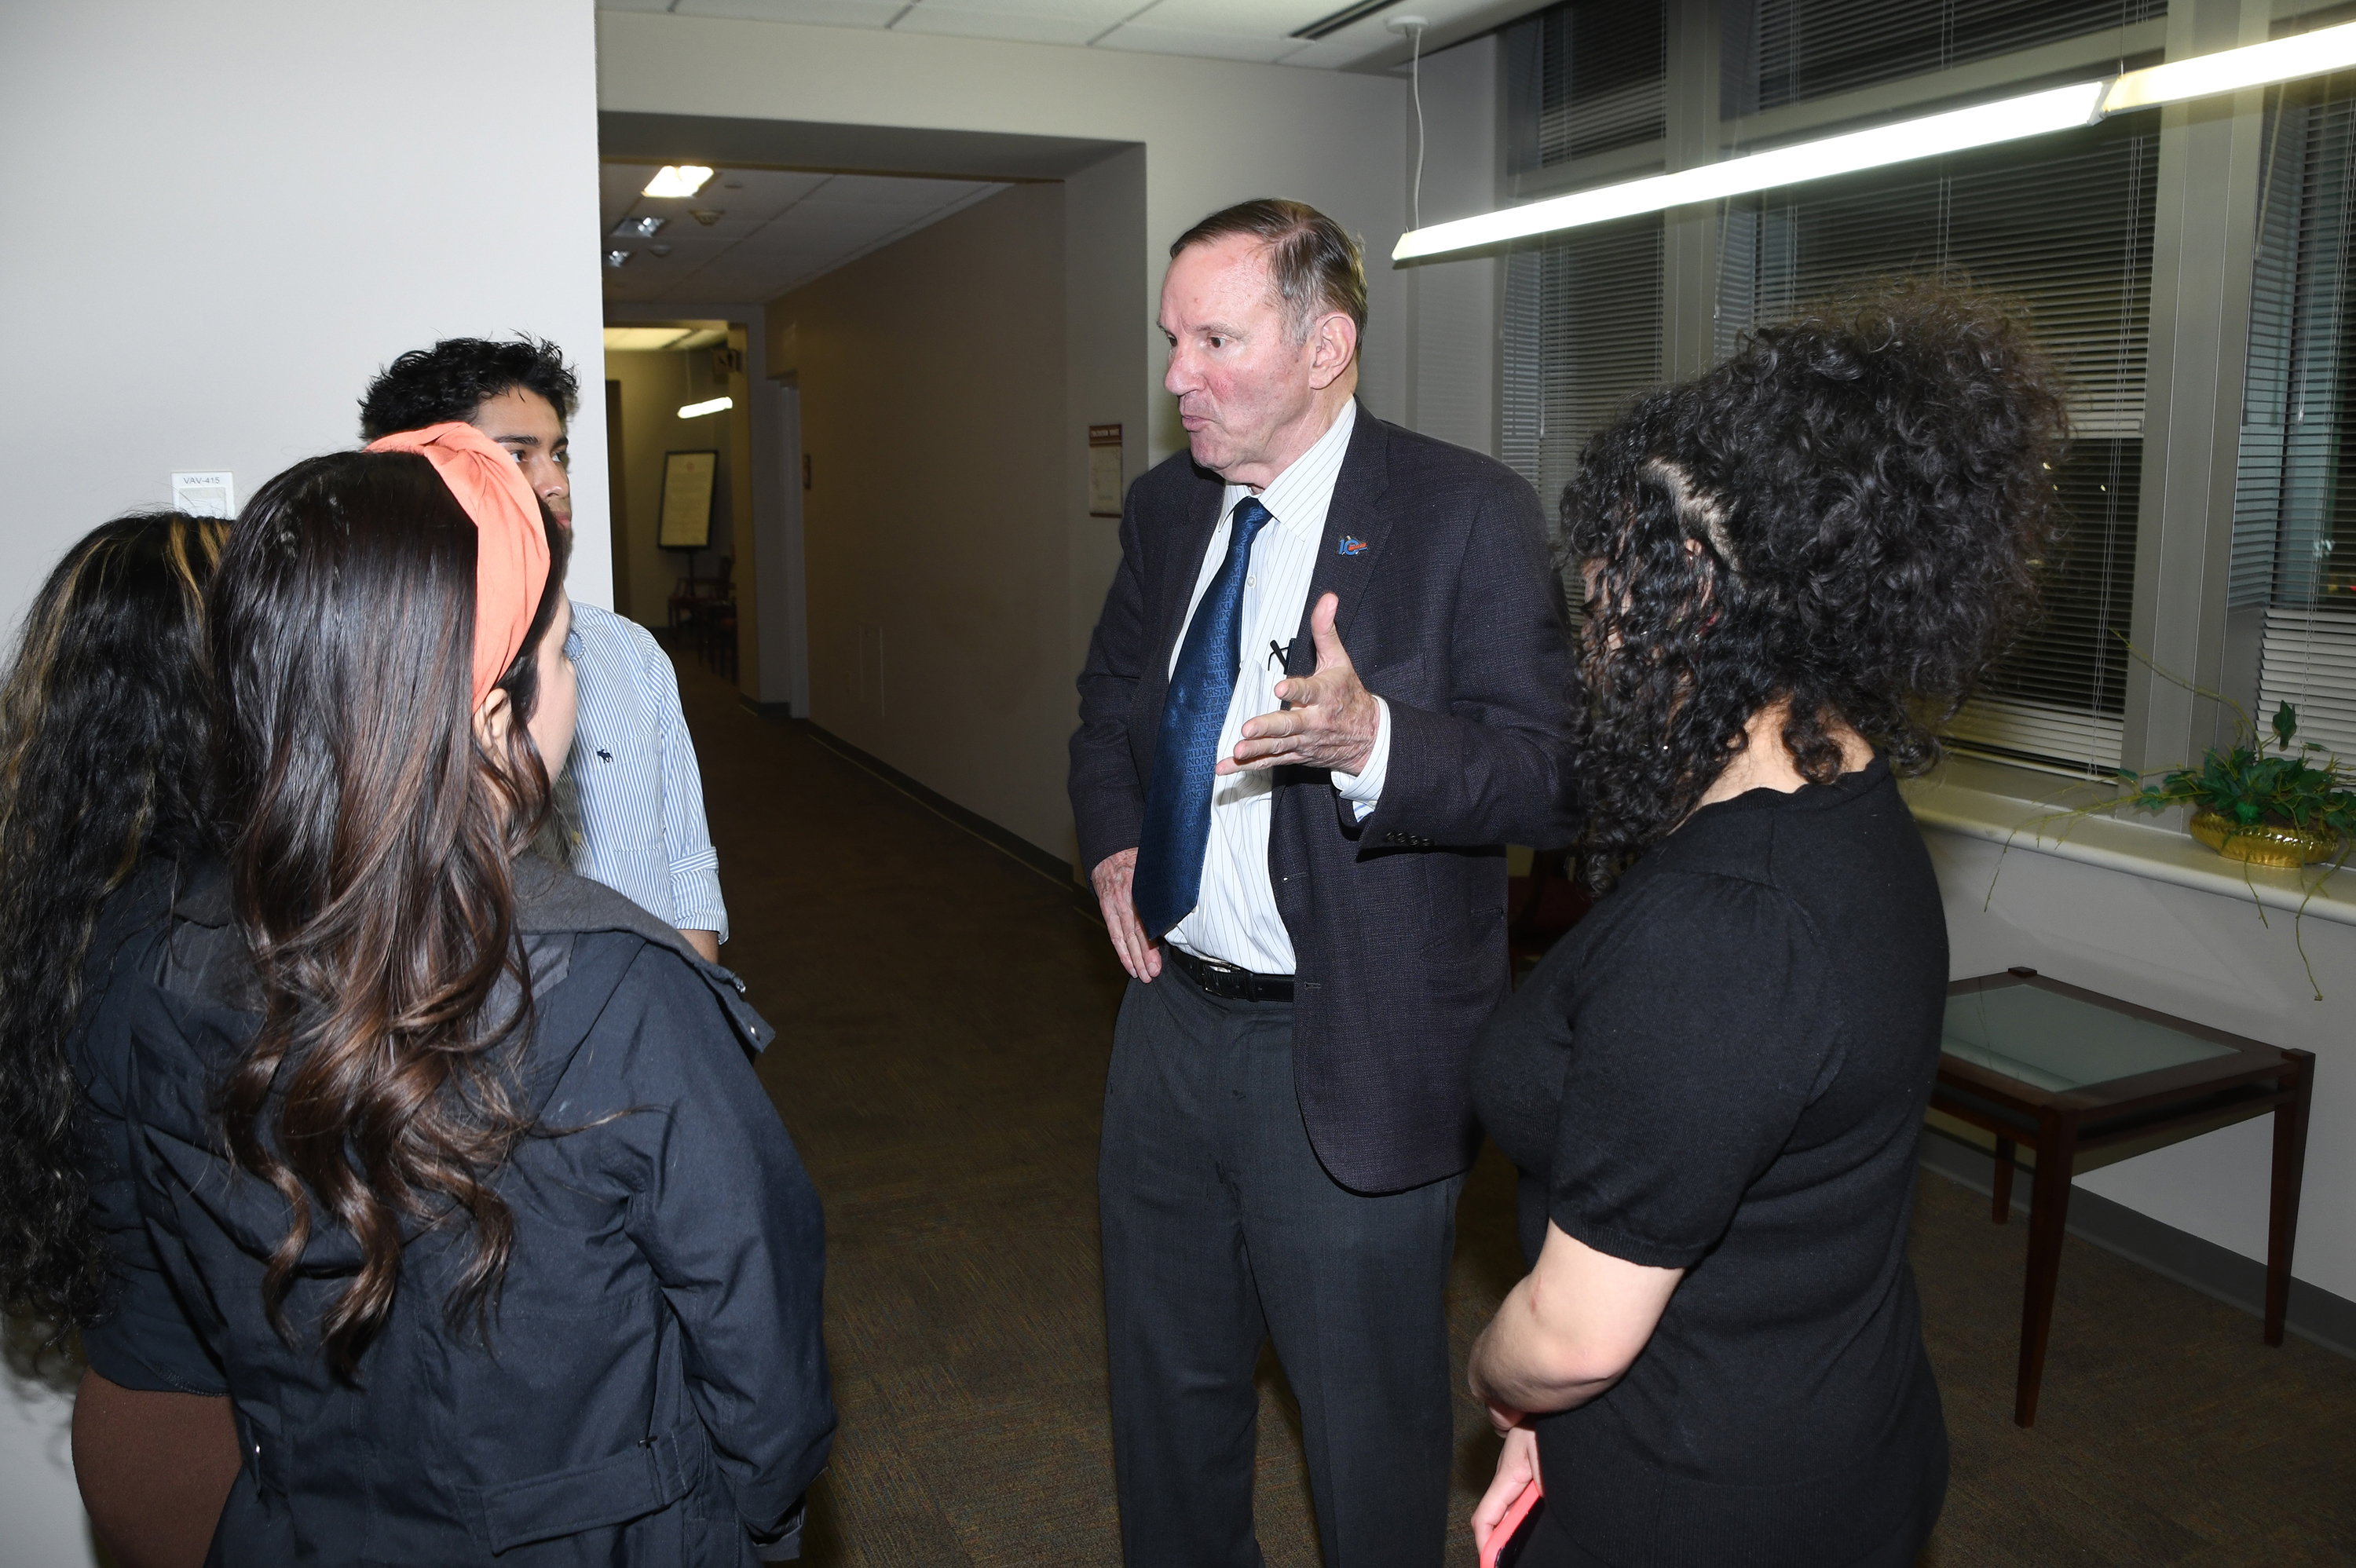 Don Graham chats with some Dreamers during his DSU visit.